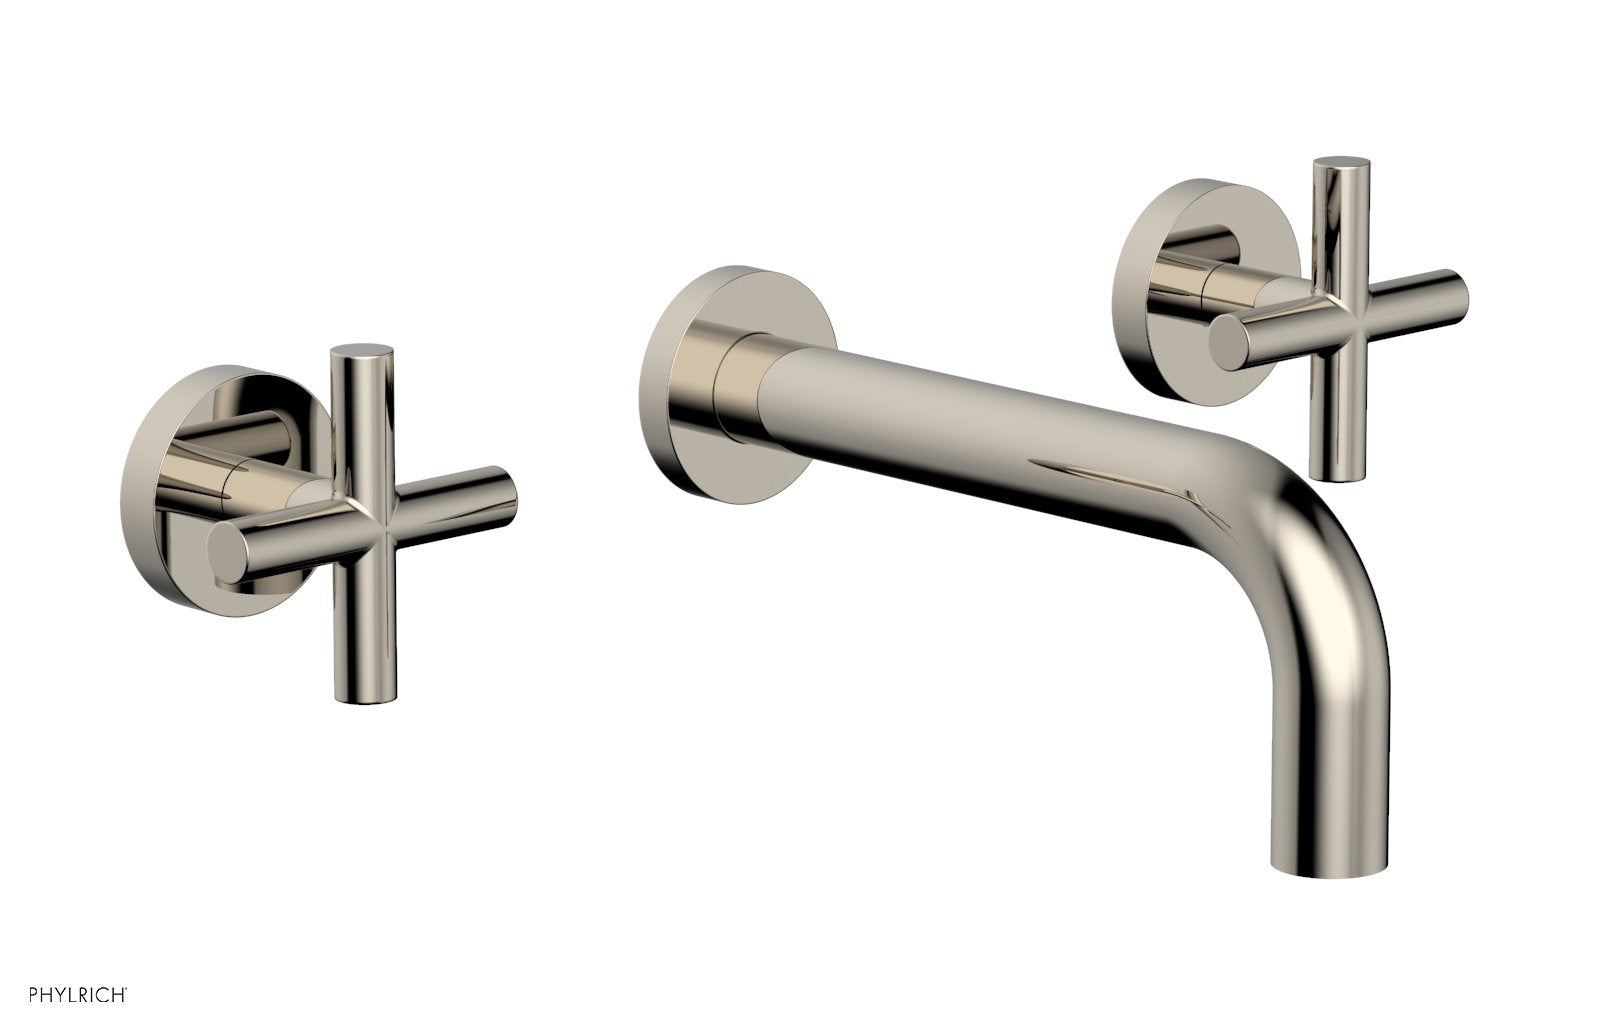 Phylrich TRANSITION Wall Tub Set 7 1/2" Spout - Cross Handles